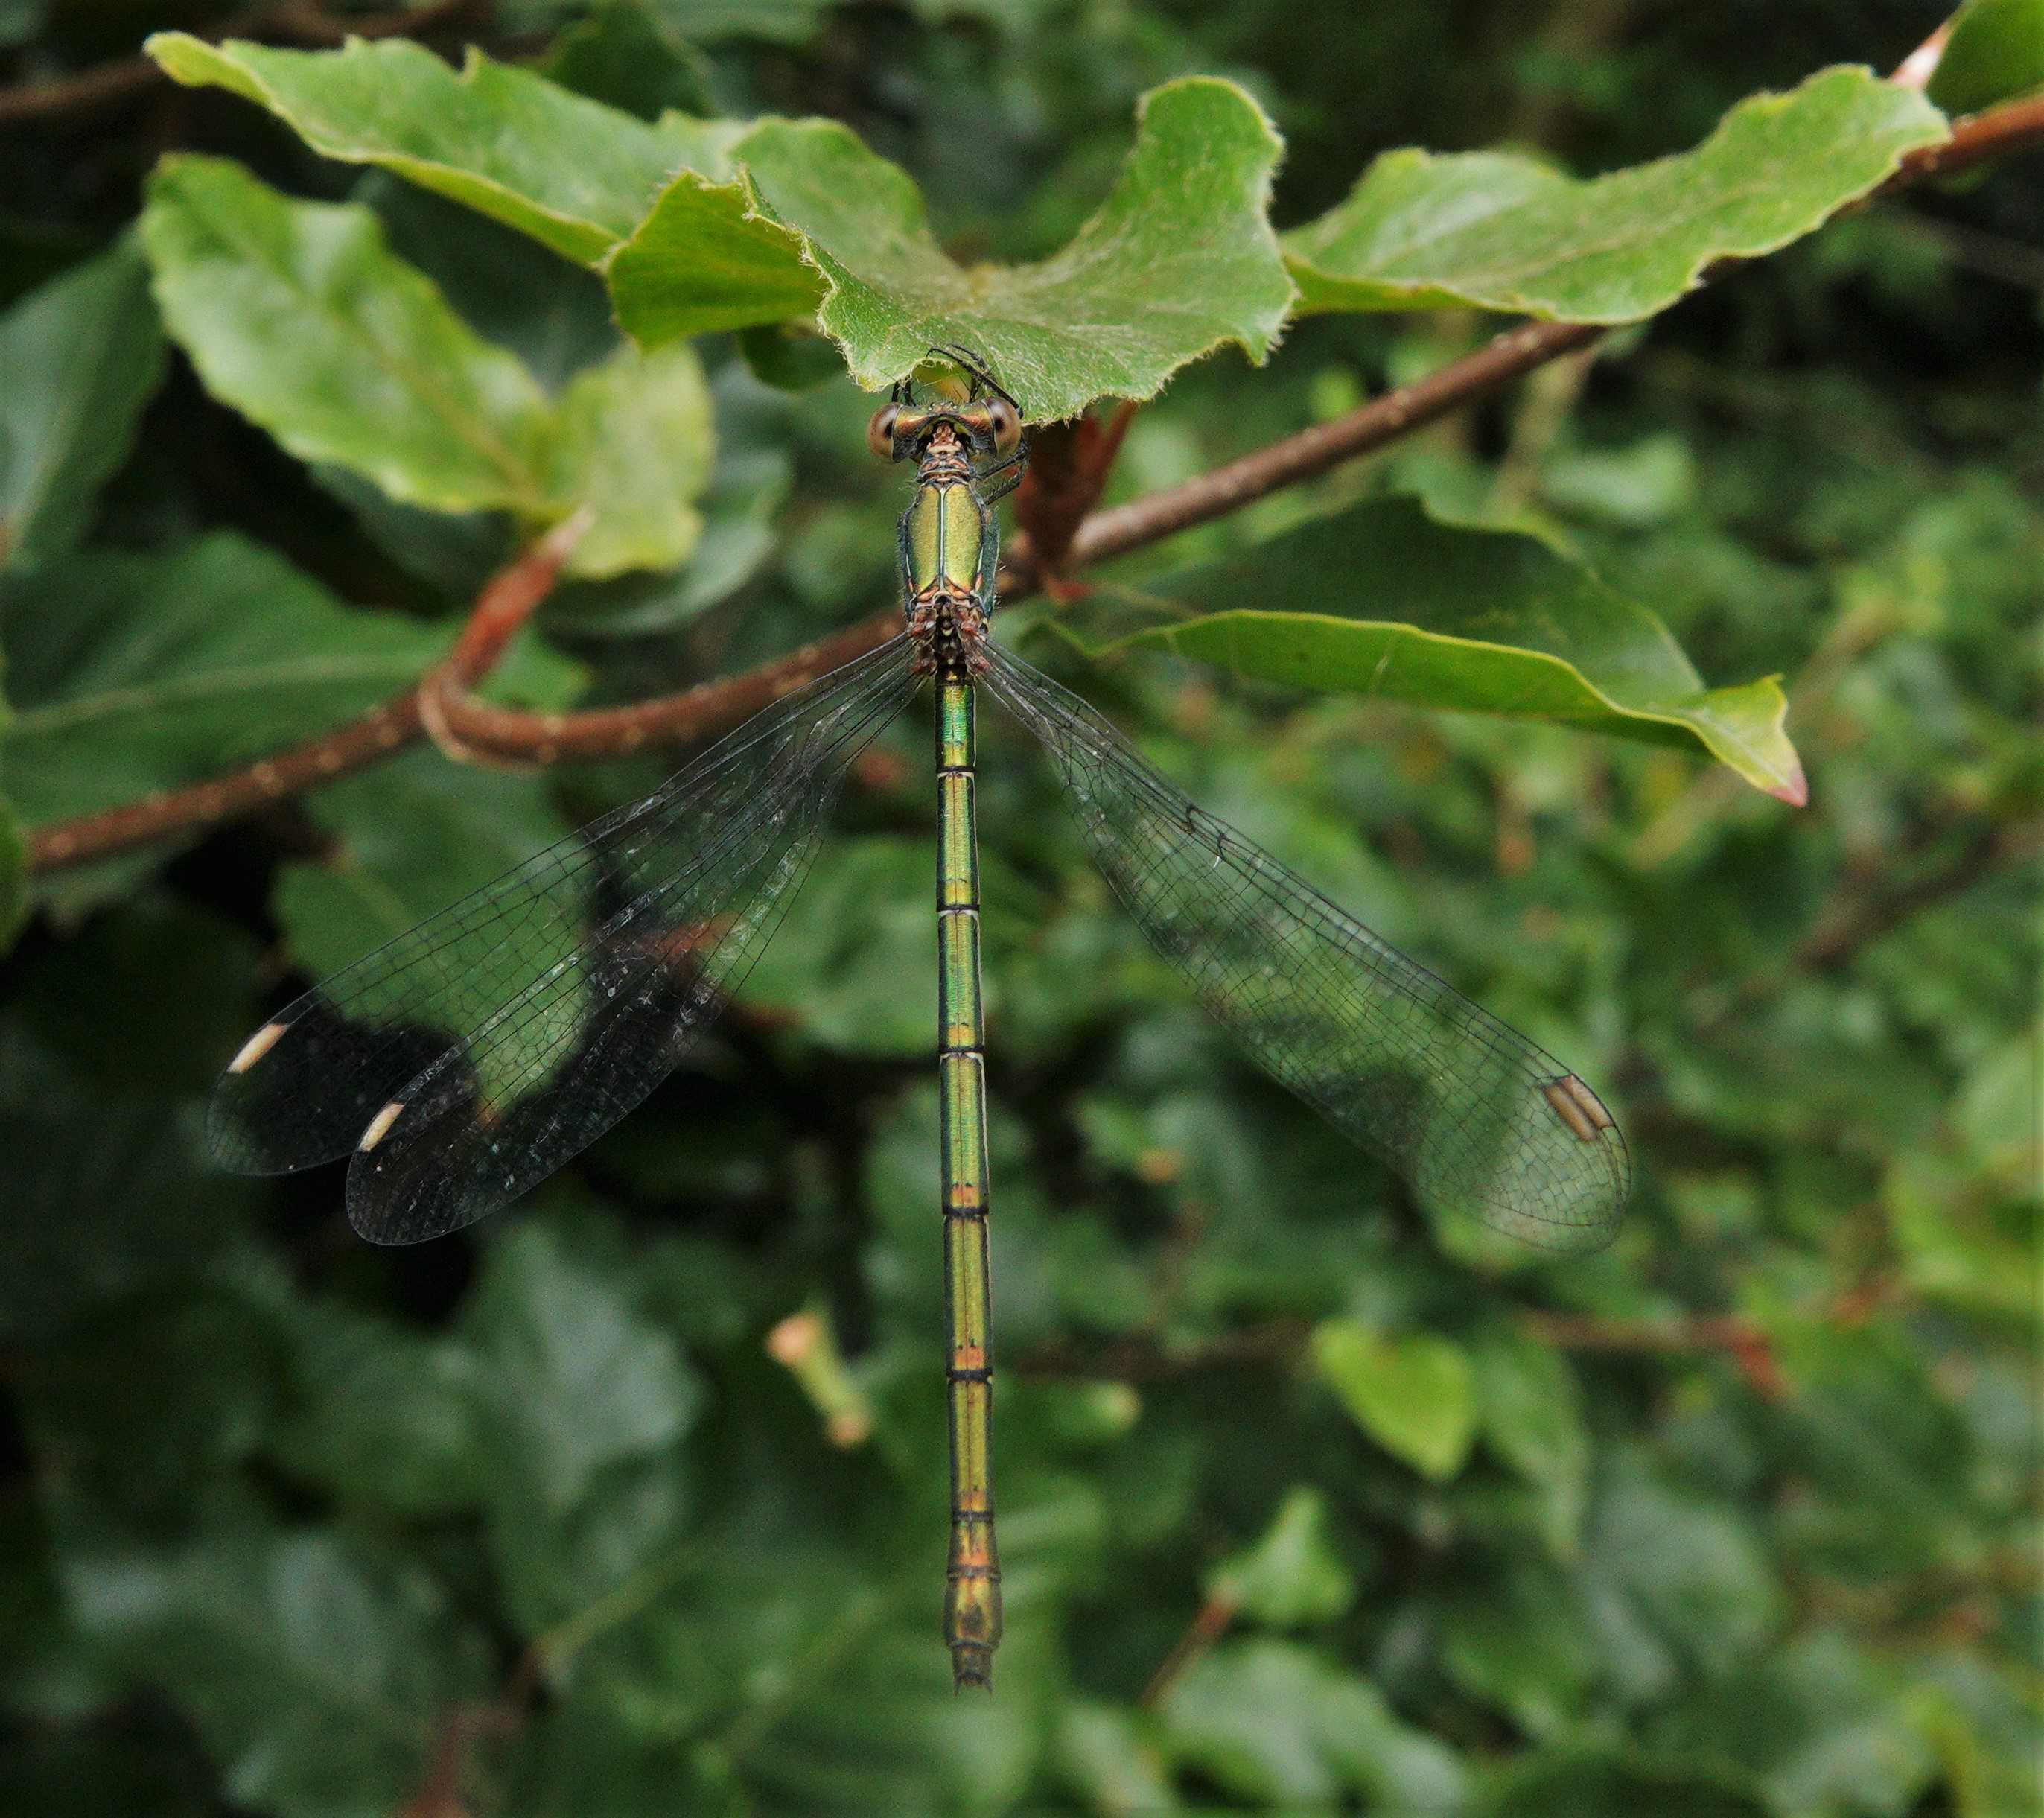 Second year for the Willow Emerald damselfly